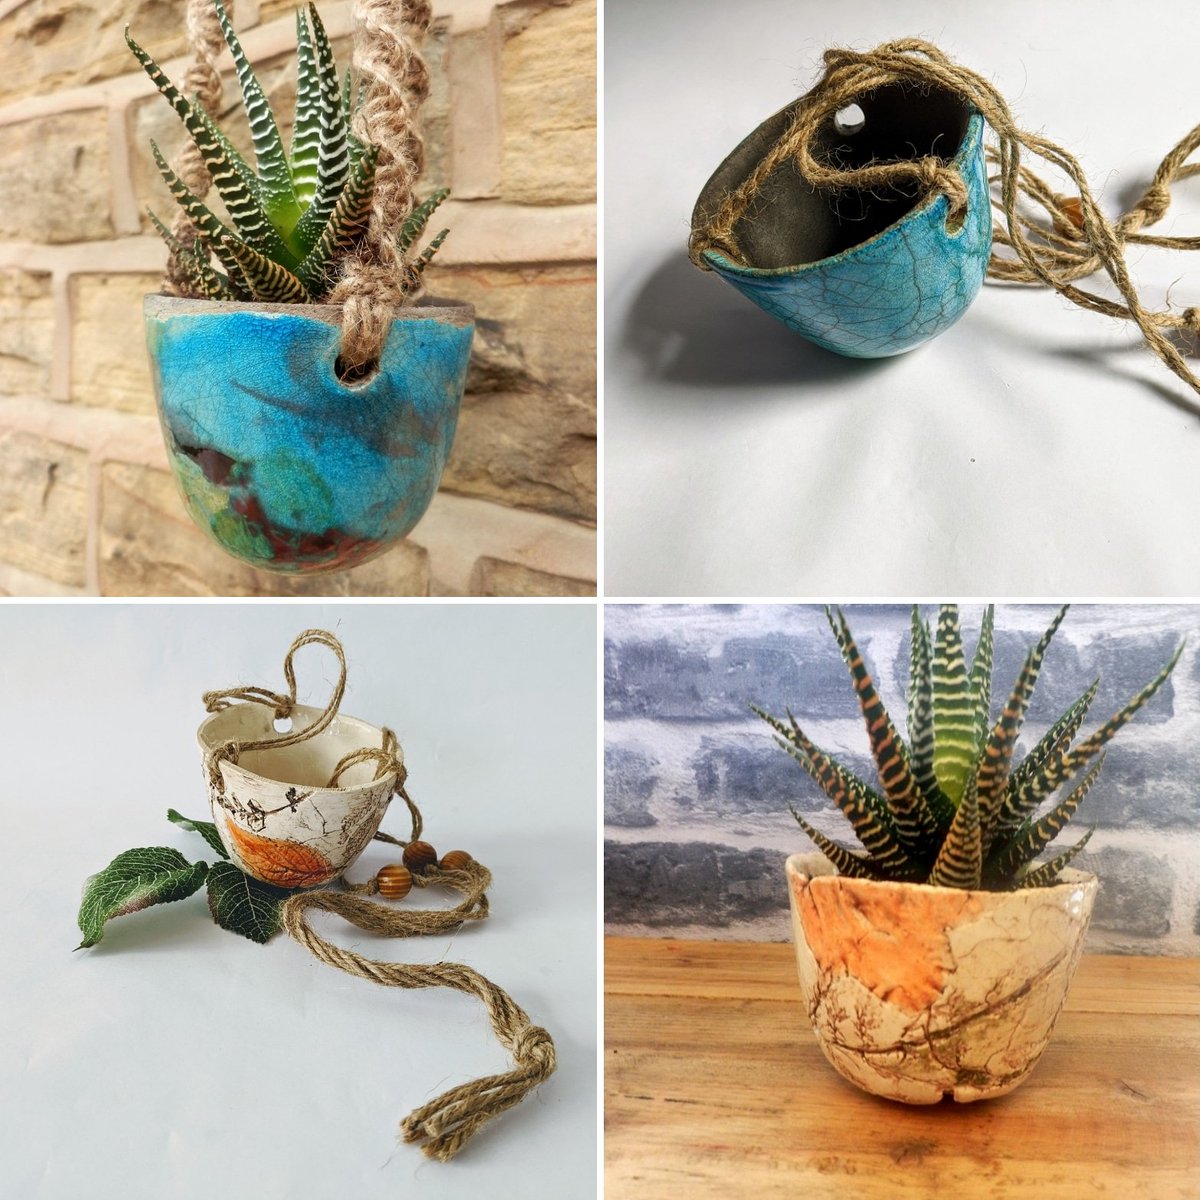 All my ceramic planters are back in stock now 😁 check out my Etsy shop for more details...
etsy.com/uk/shop/Tracey…

#hangingplanters #macrameplanthanger #ceramicplanter #indoorgarden #etsy #etsyseller #succulents #airplants #cacti #HandmadeHour #UKsmallbiz #barnsleyisbrill